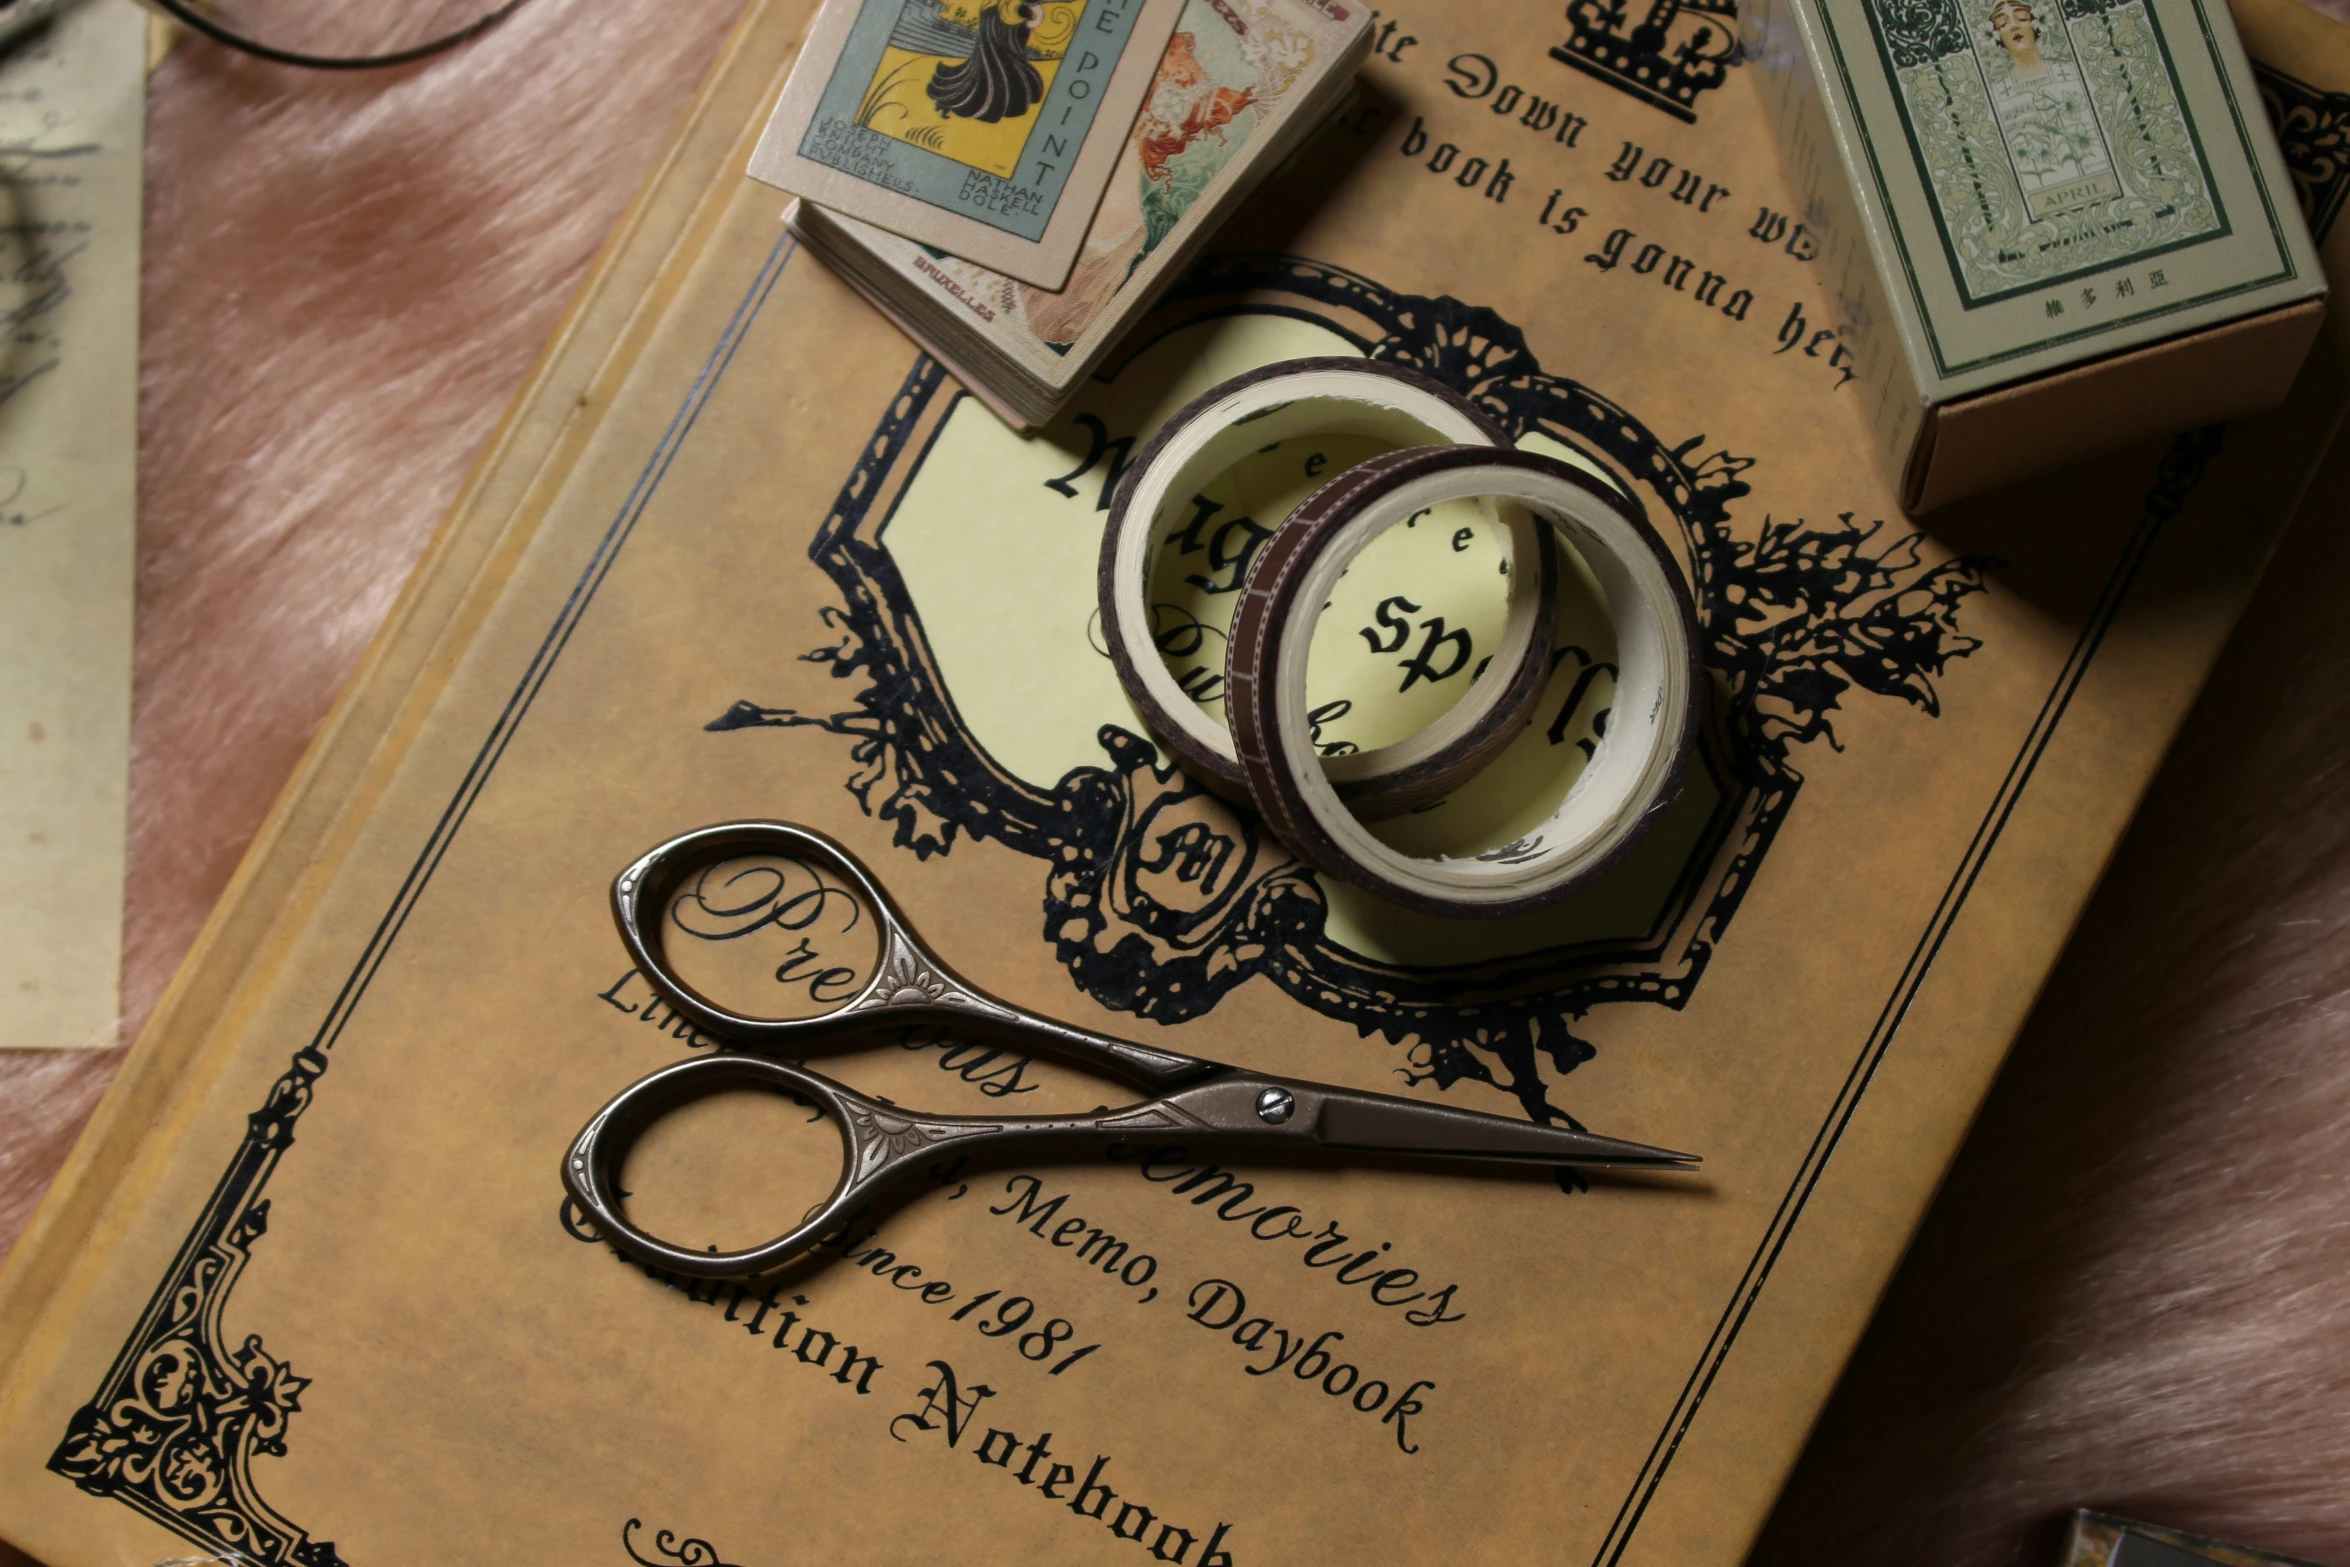 scissors and a book on the table